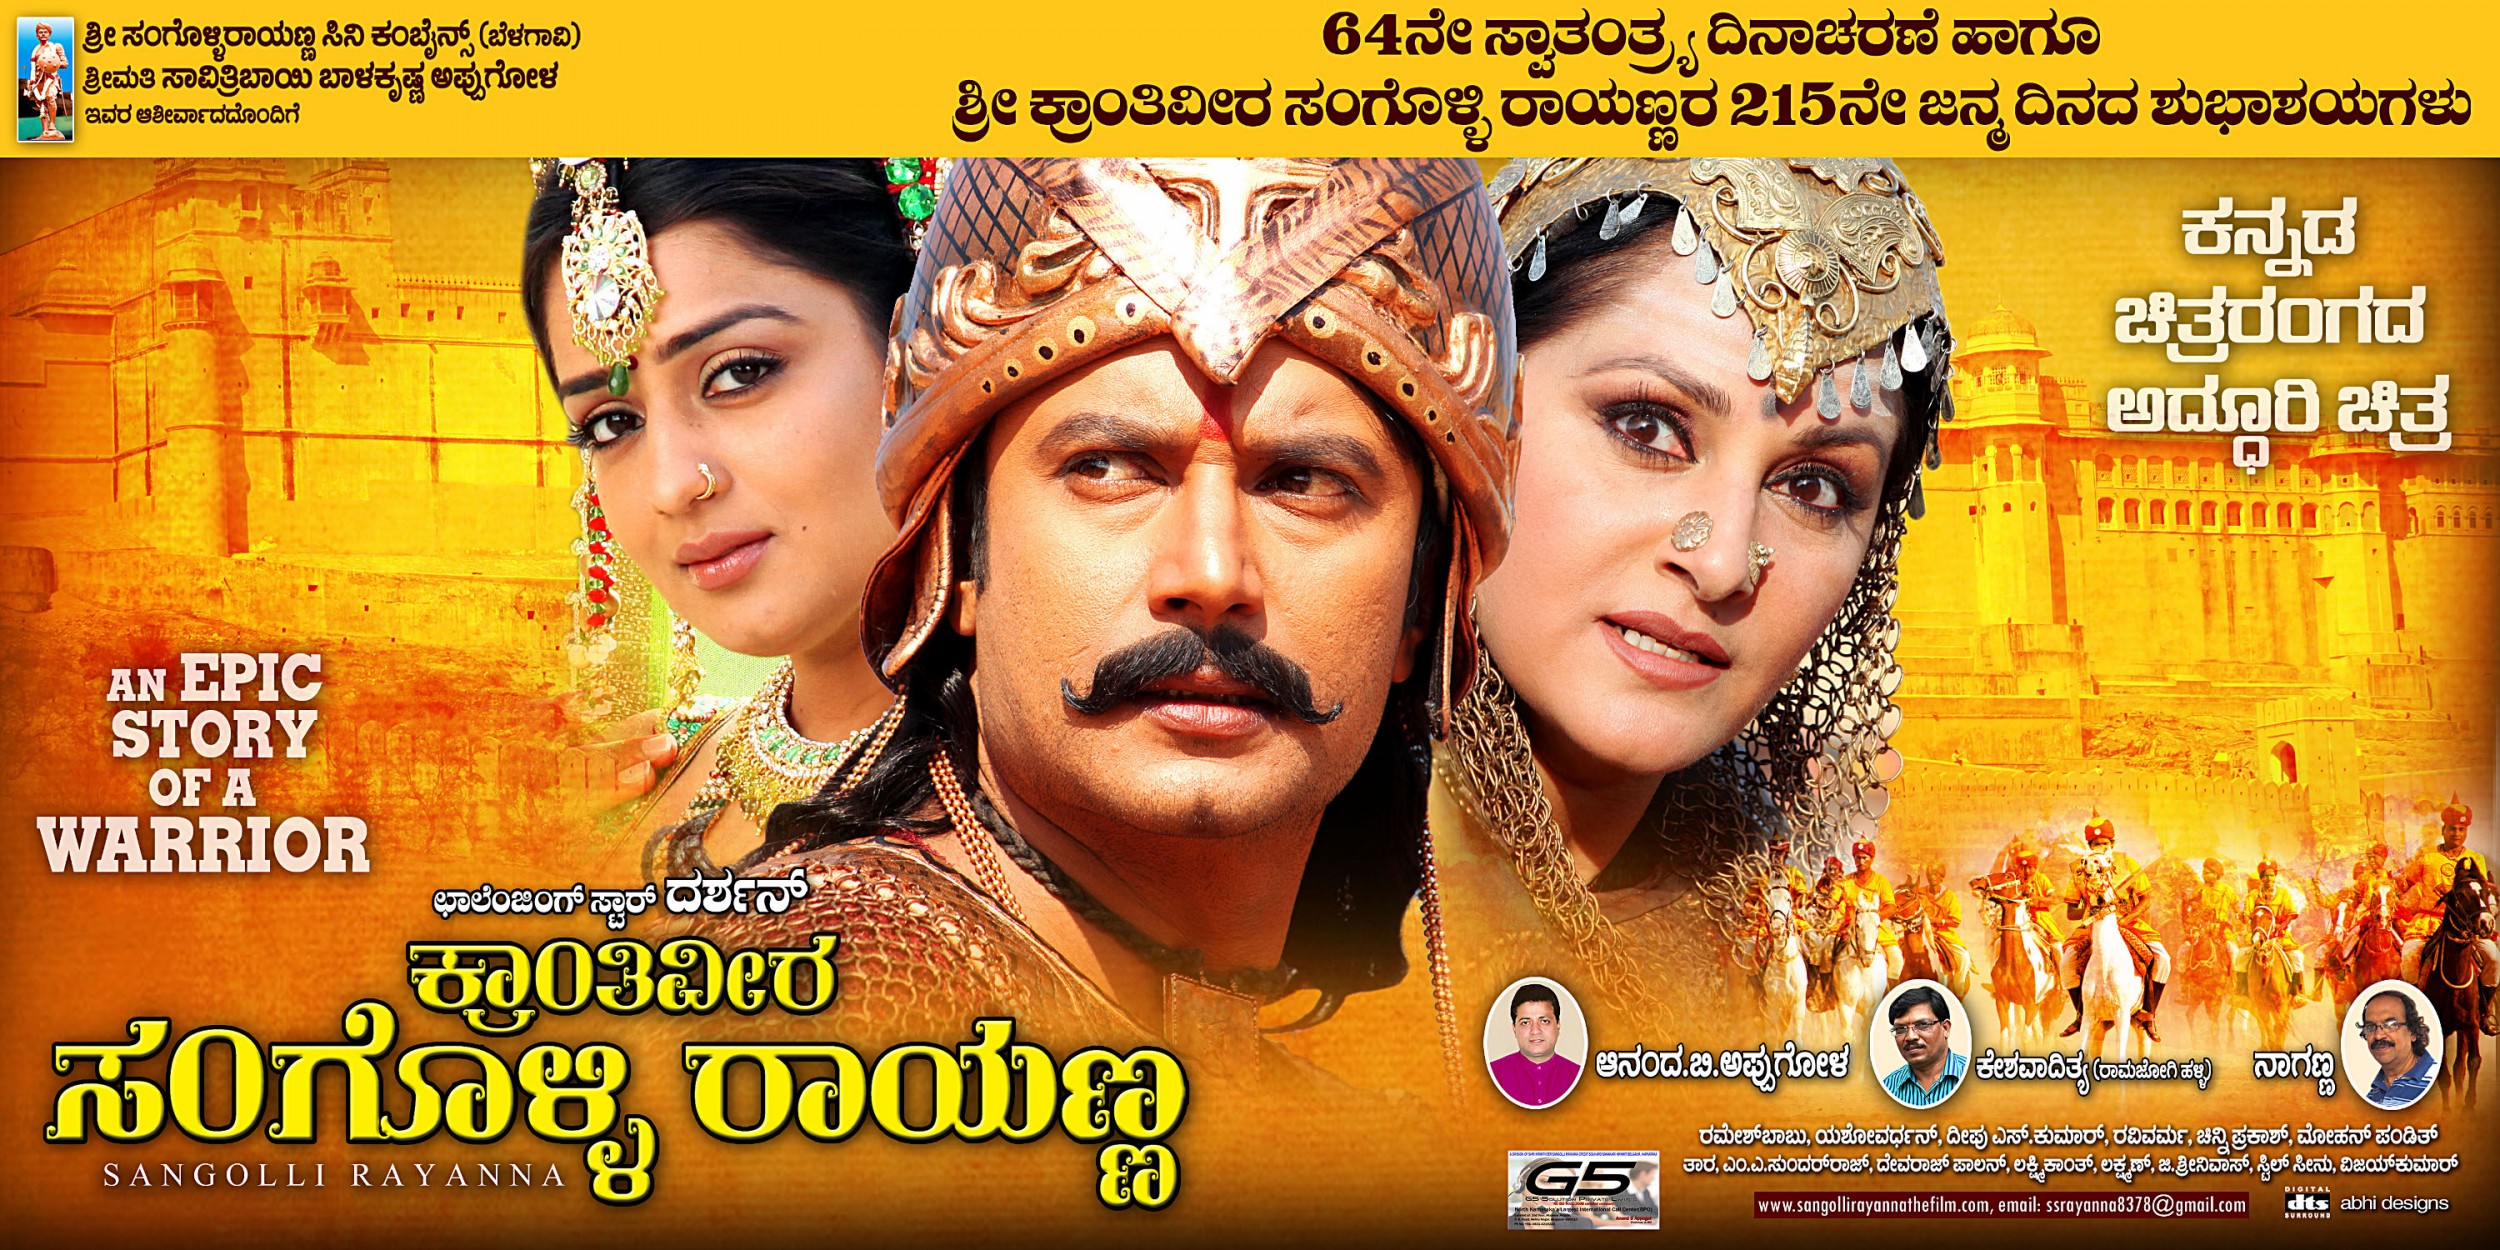 Mega Sized Movie Poster Image for Sangolli Rayanna (#8 of 79)